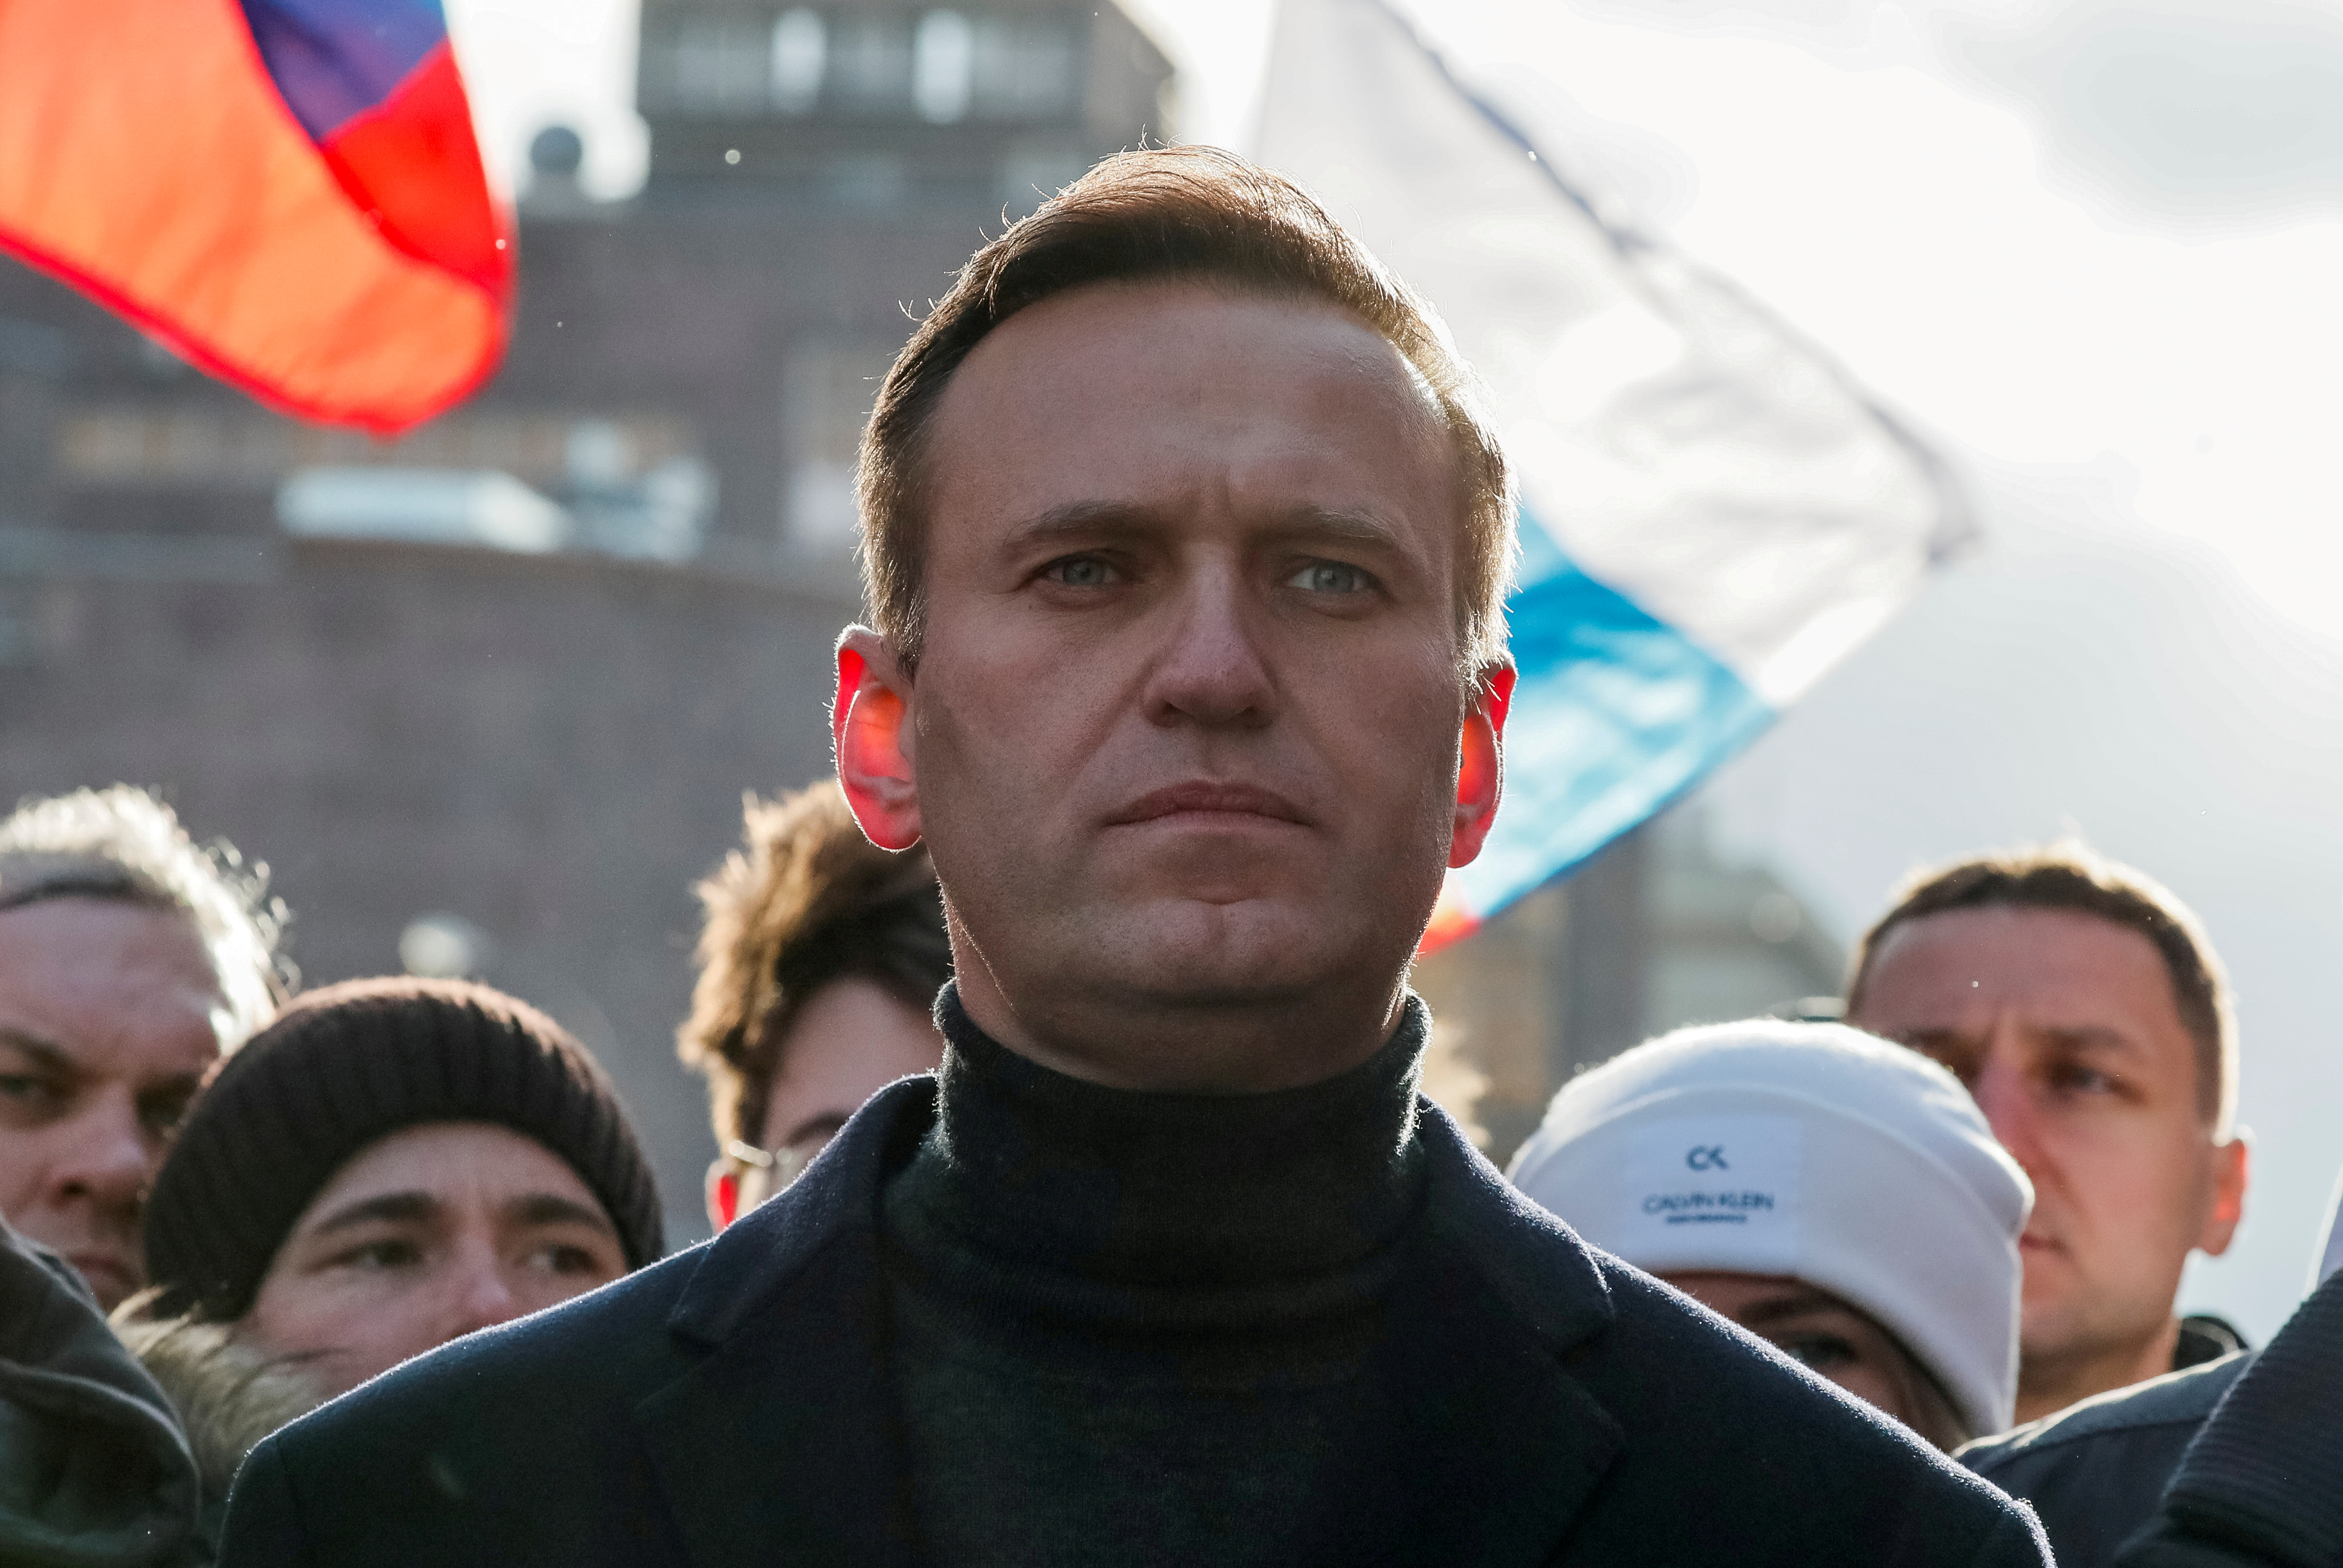 Russian opposition politician Alexei Navalny takes part in a rally in Moscow, Russia, February 29, 2020. REUTERS/Shamil Zhumatov/File Photo